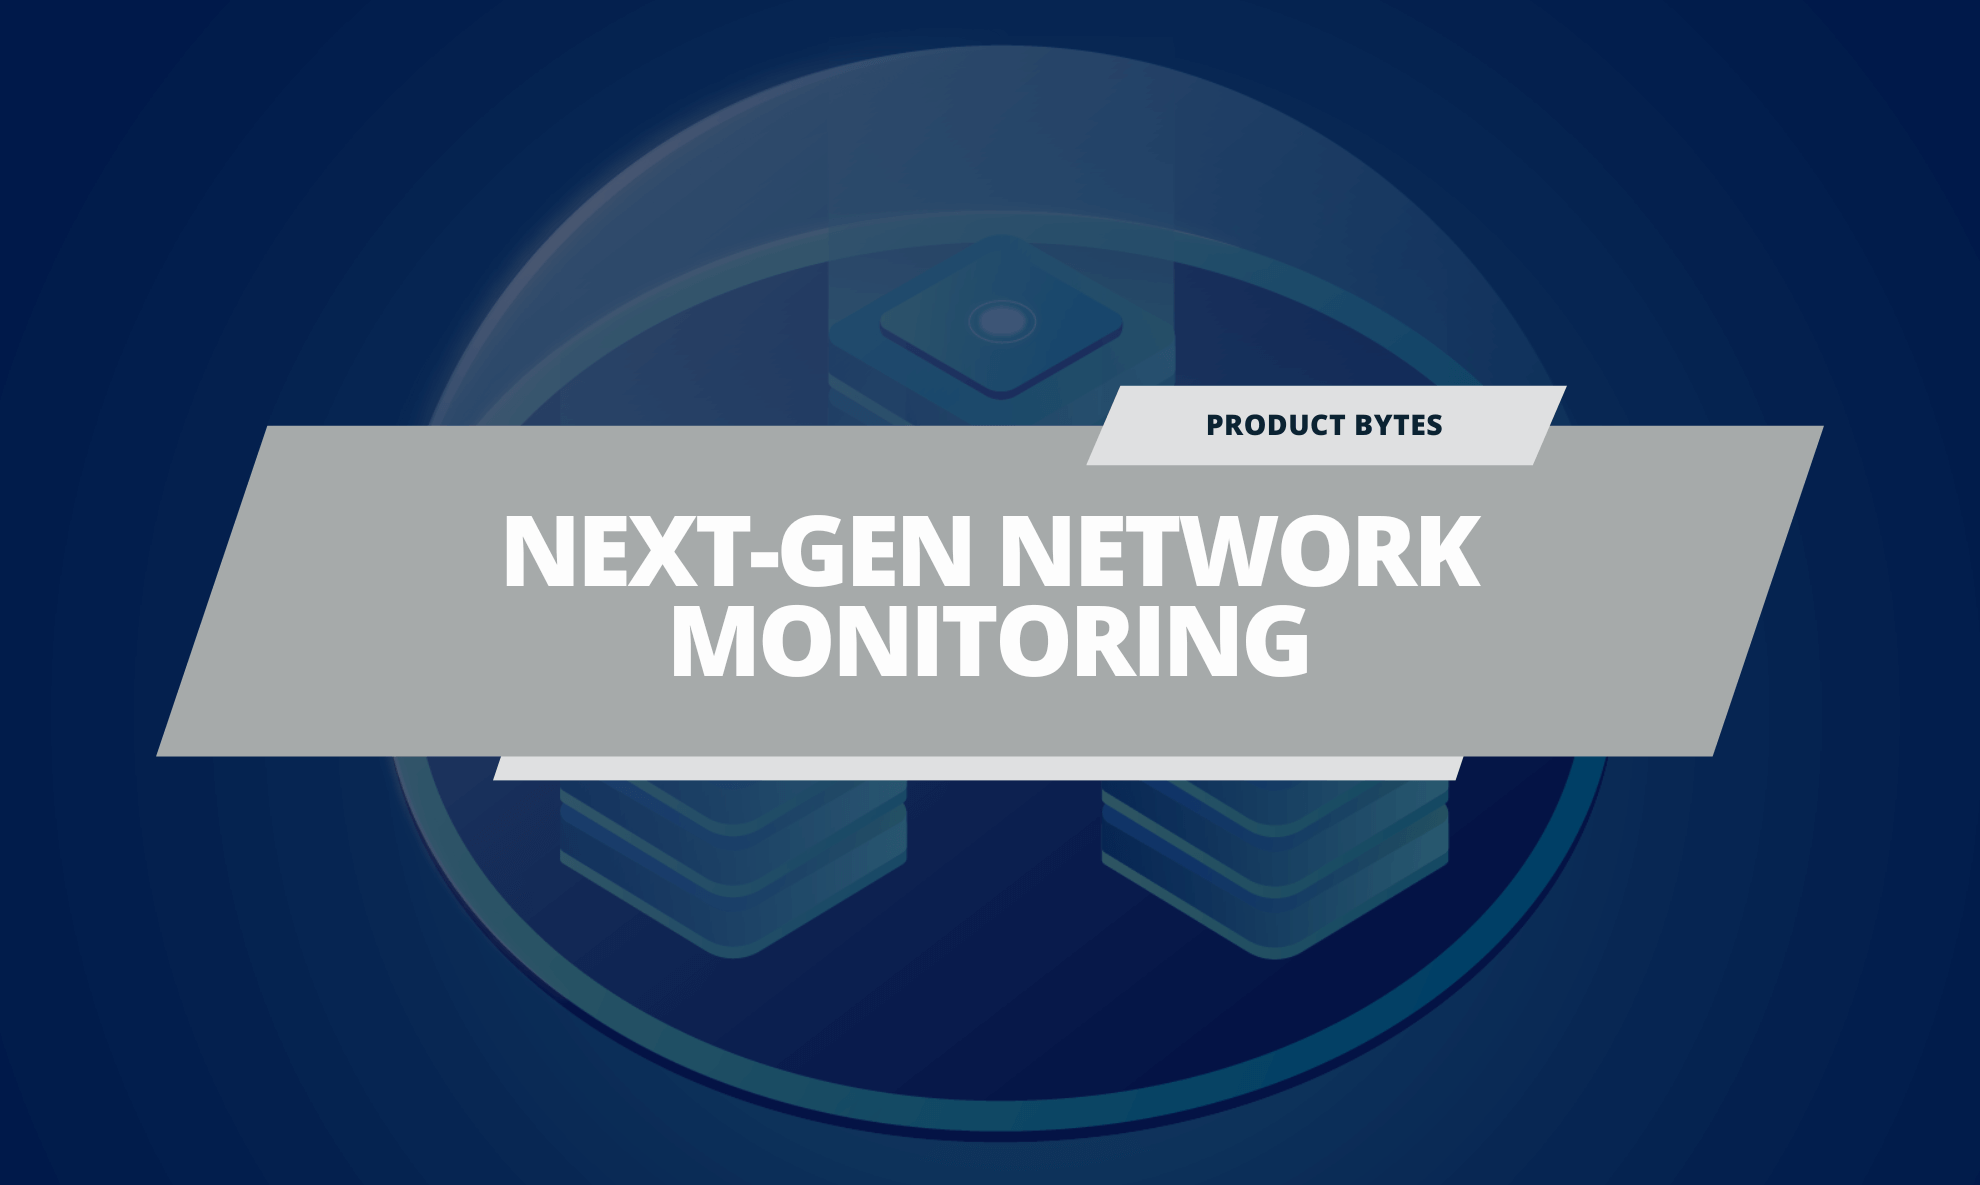 Next-Gen Network Monitoring: Tools and Techniques for Today’s Networks